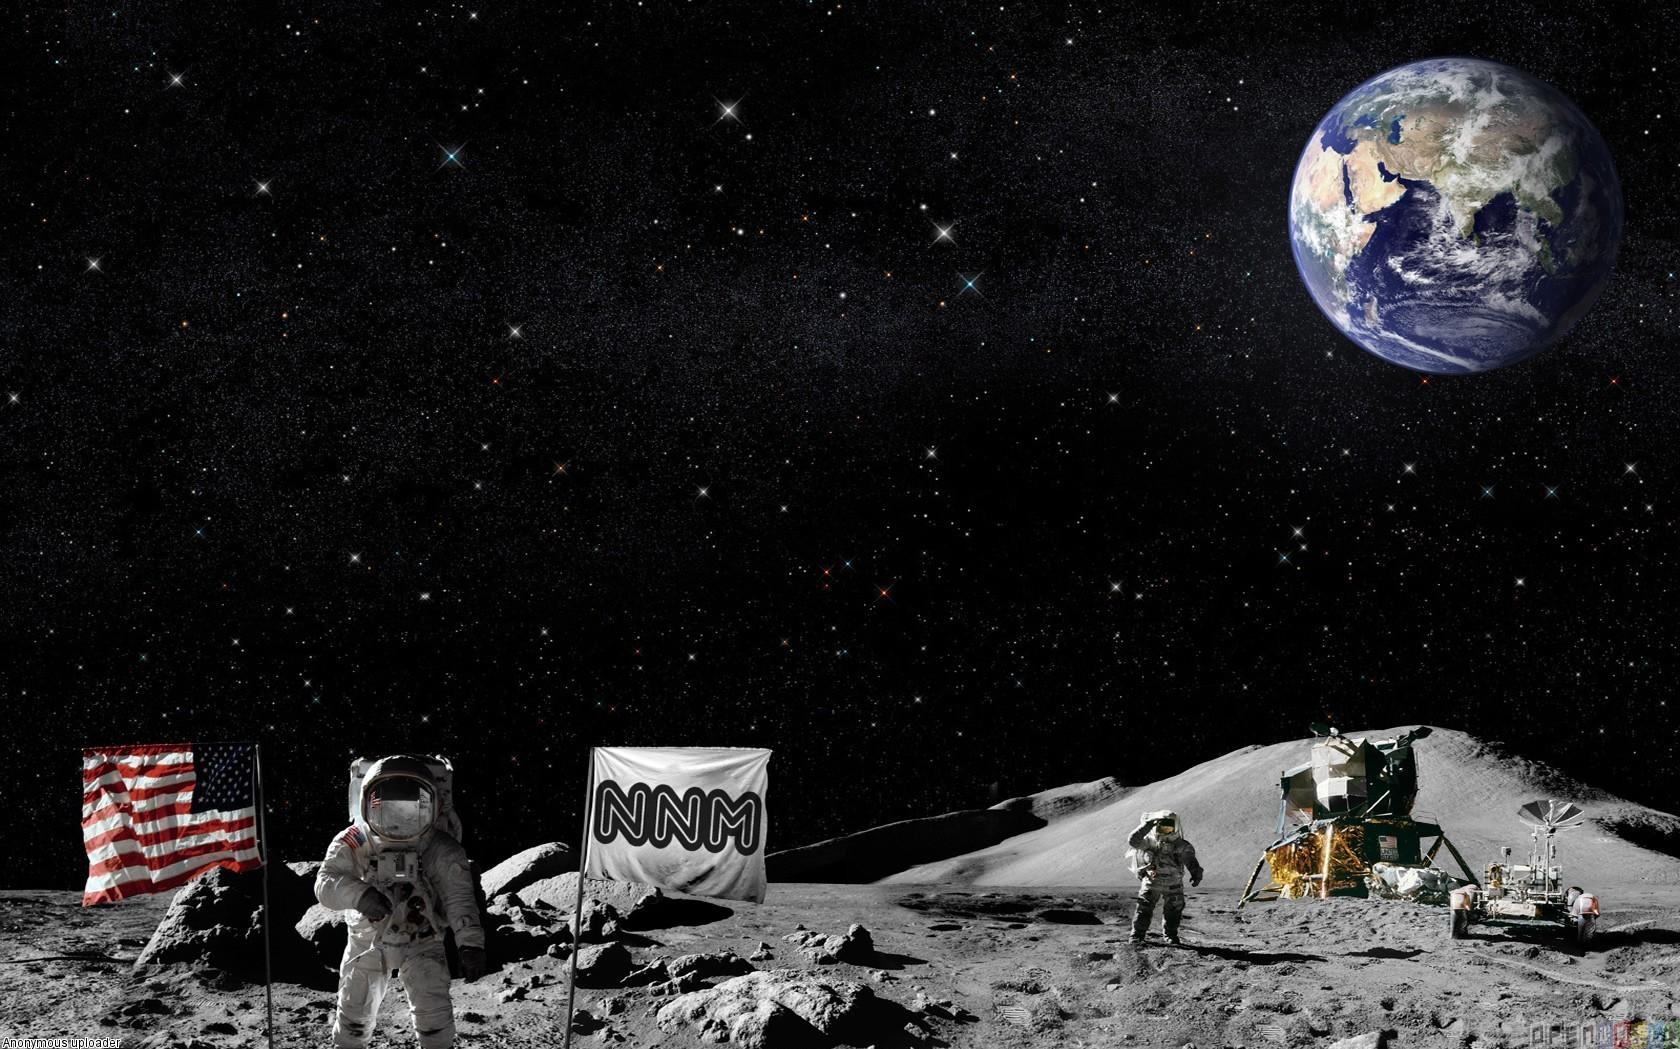 Free download Astronaut Walking On the Moon [for your